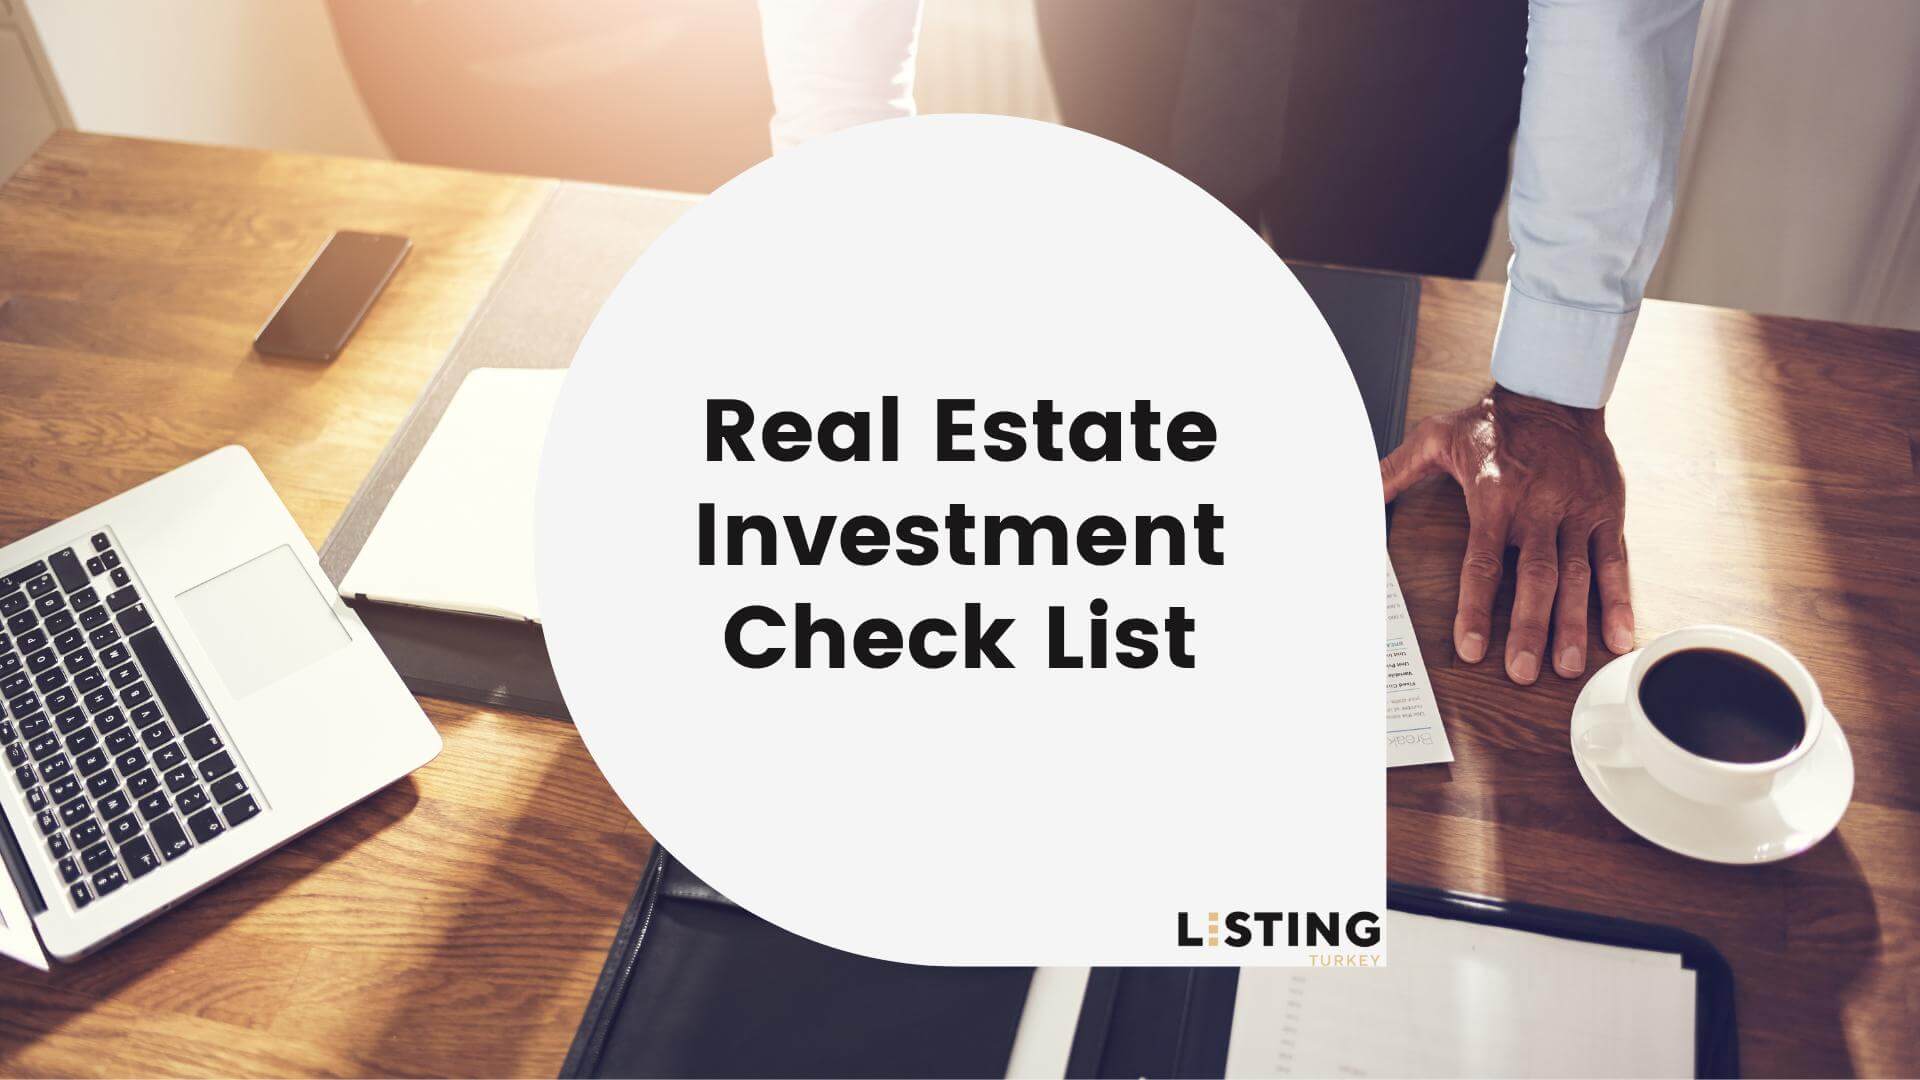 Real Estate Investment Check List